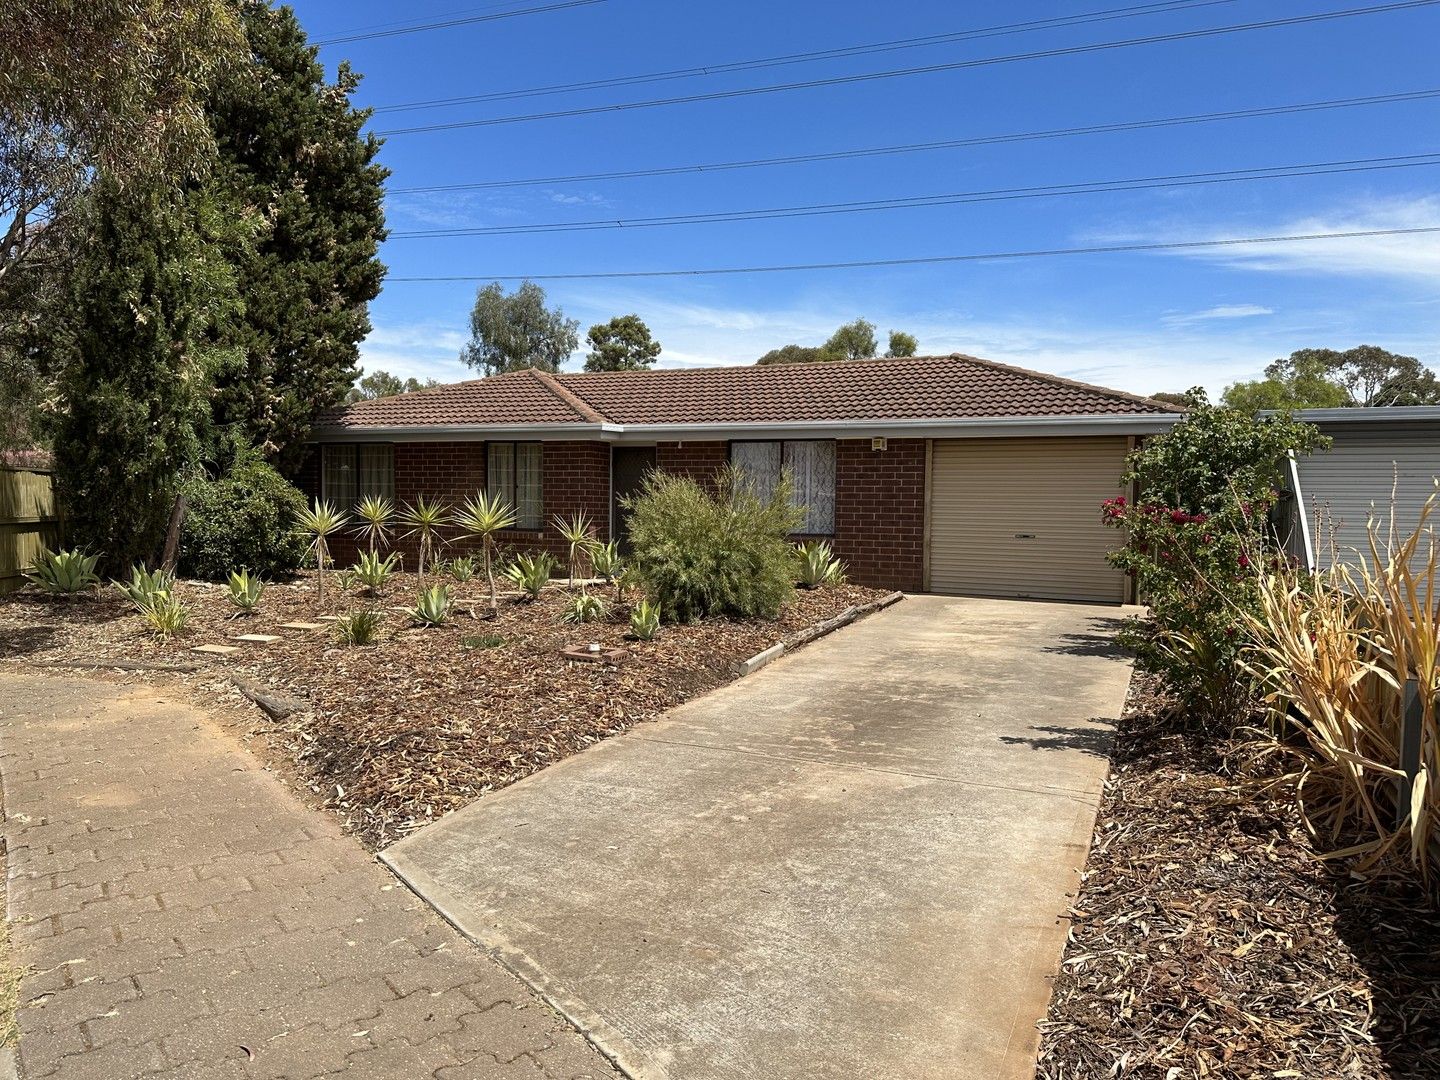 3 bedrooms House in 17 Linwood Crescent PARAFIELD GARDENS SA, 5107